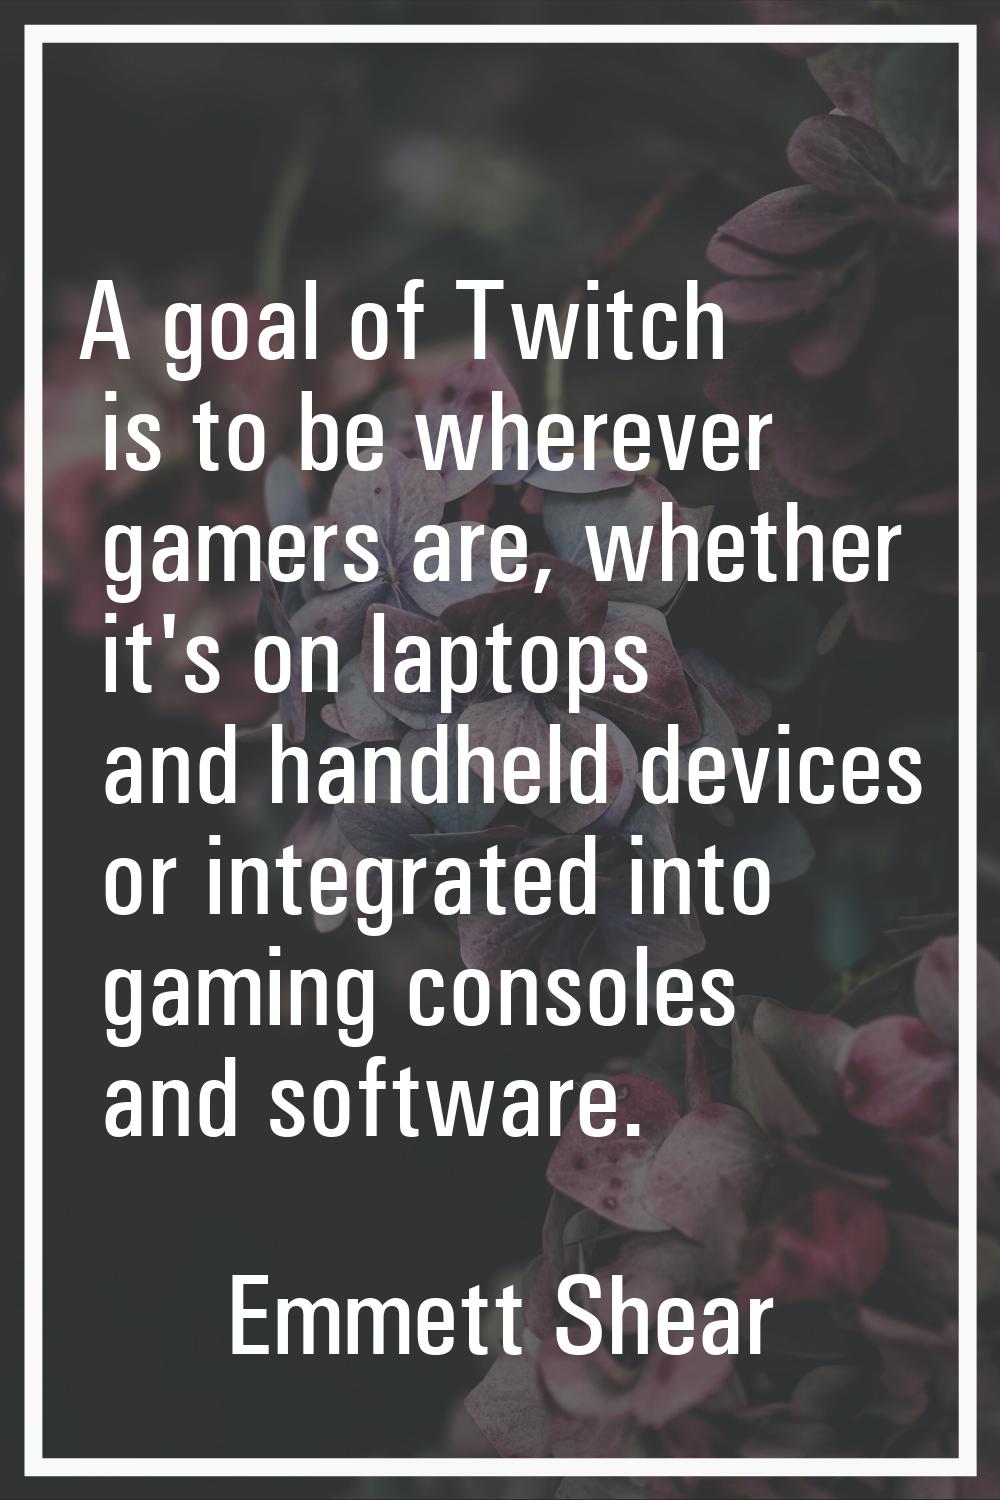 A goal of Twitch is to be wherever gamers are, whether it's on laptops and handheld devices or inte